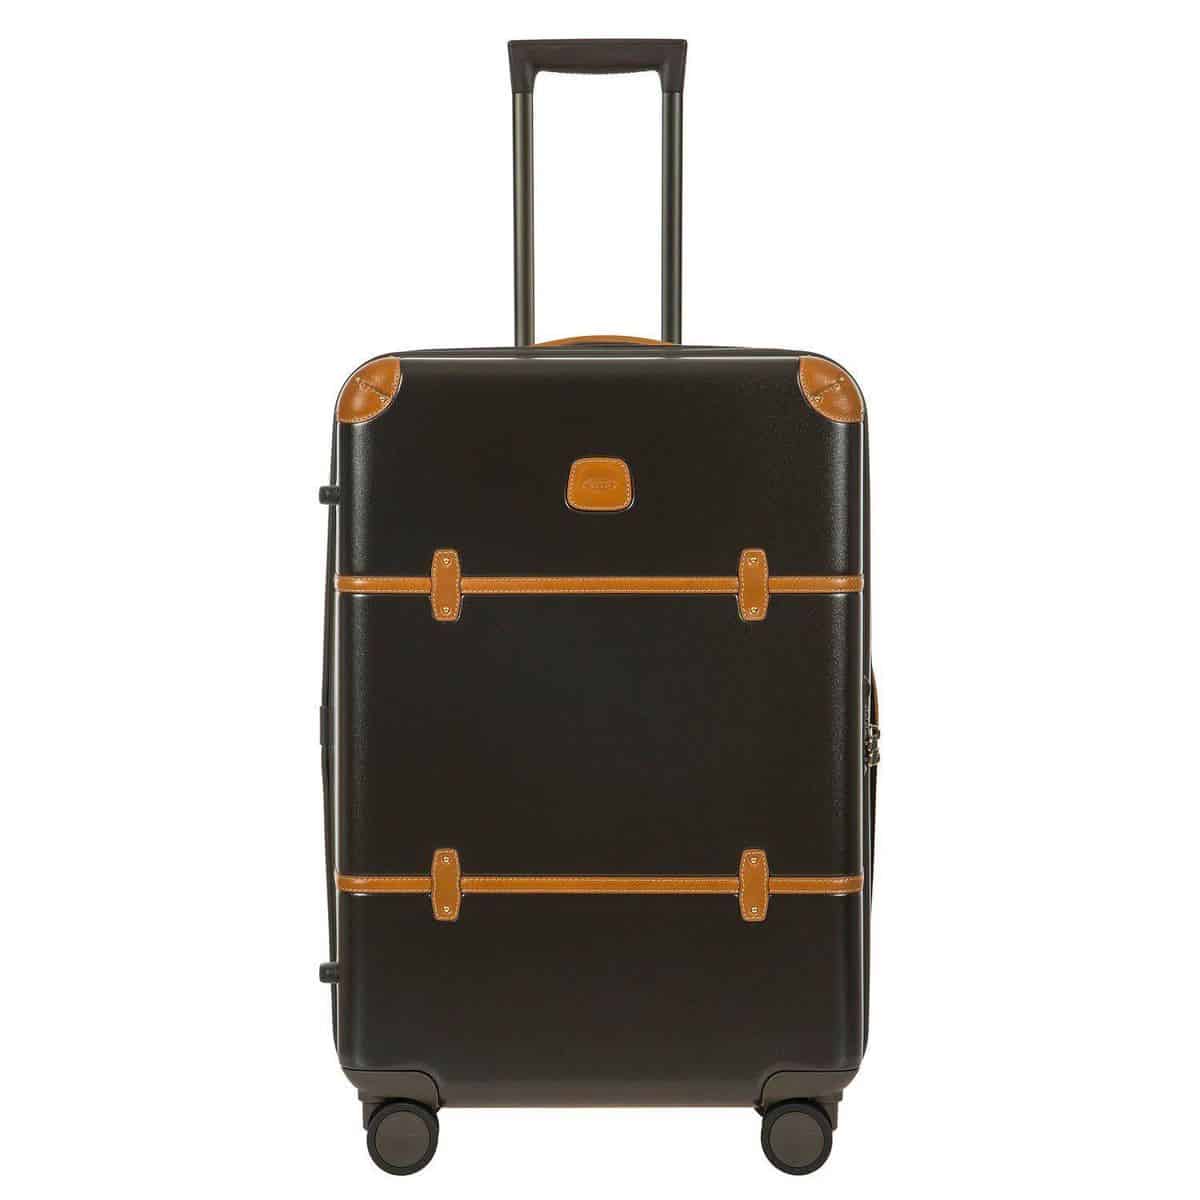 Bric’s Bellagio Carry-on Spinner